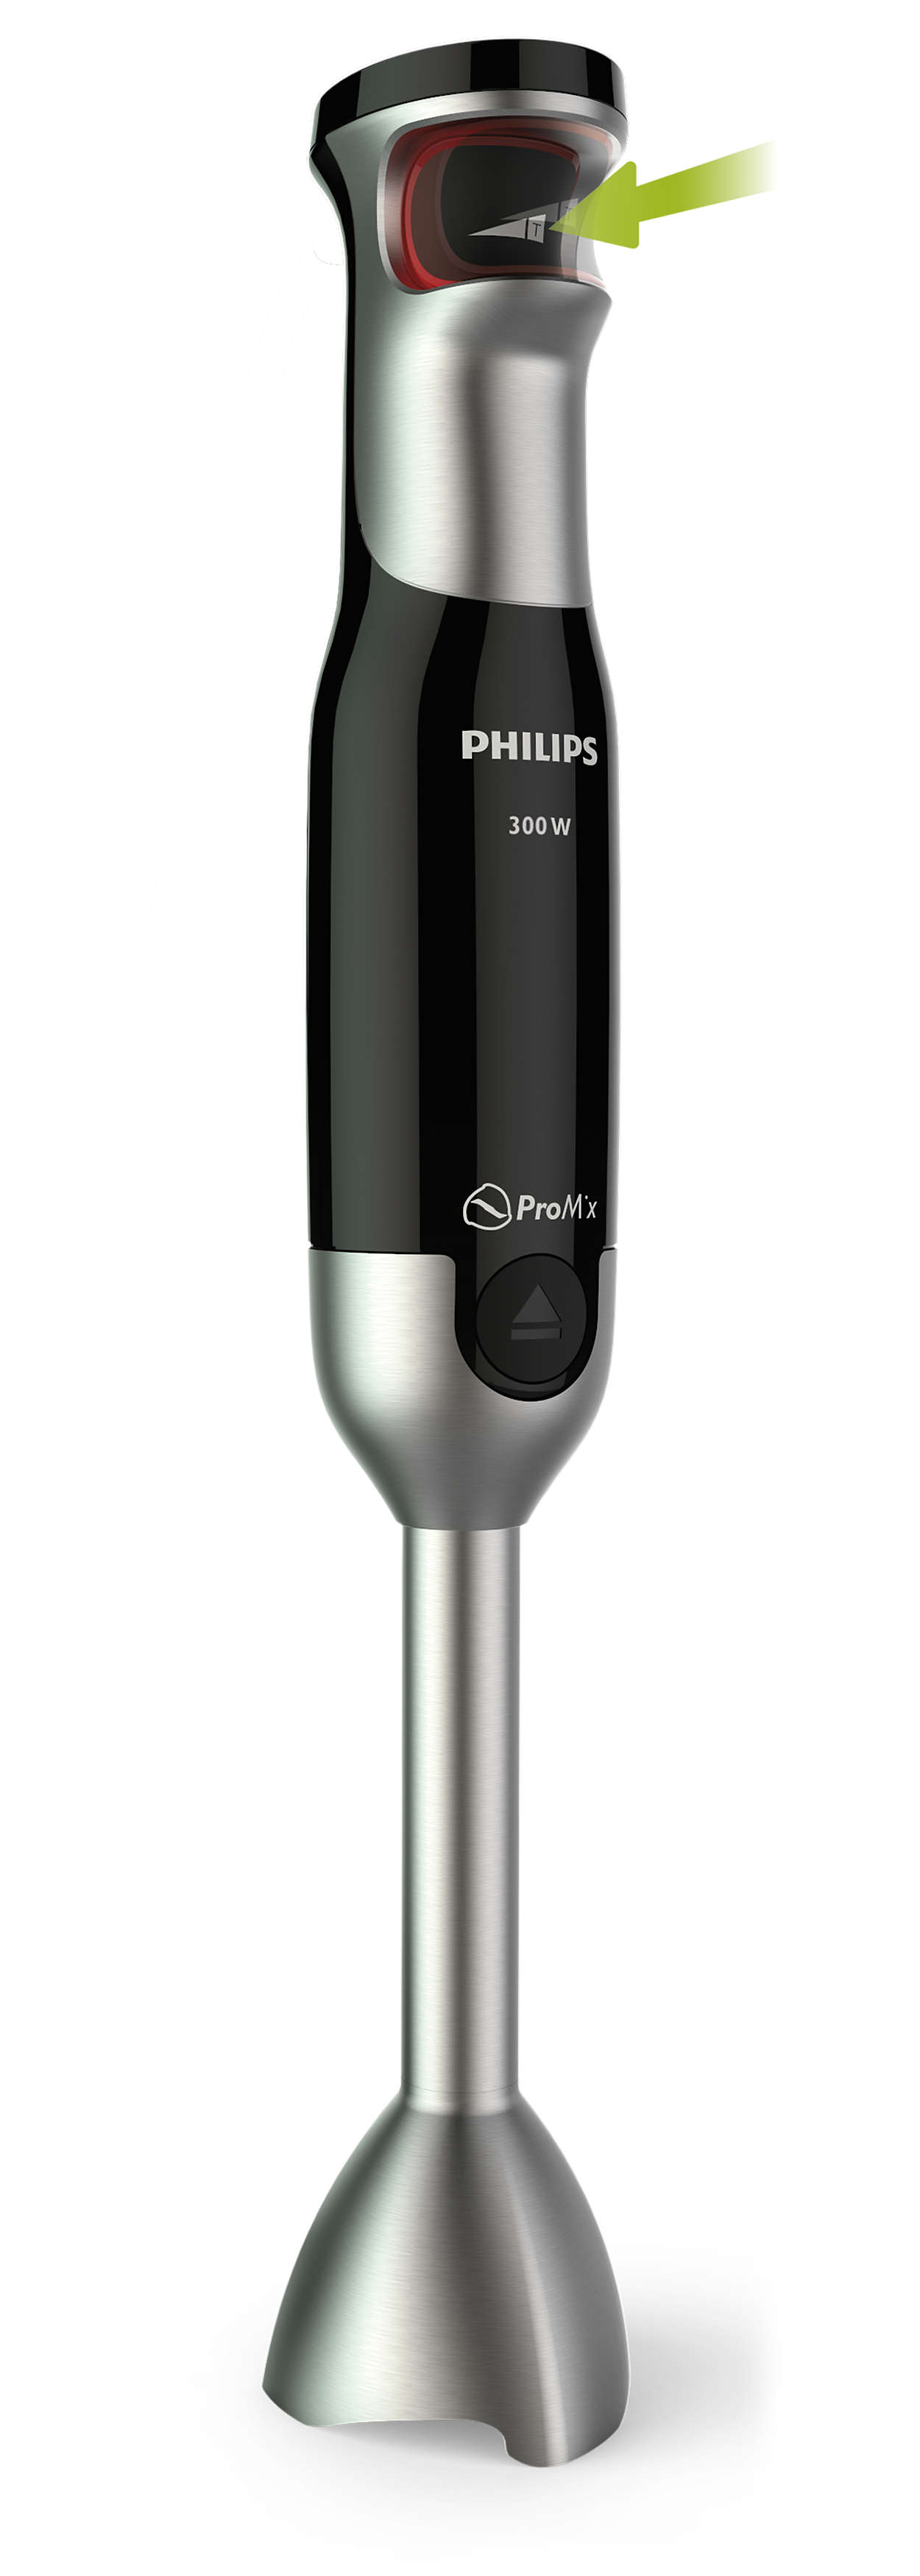 Accessories Avance Collection Philips ProMix Hand Blender Stainless HR1670/92 